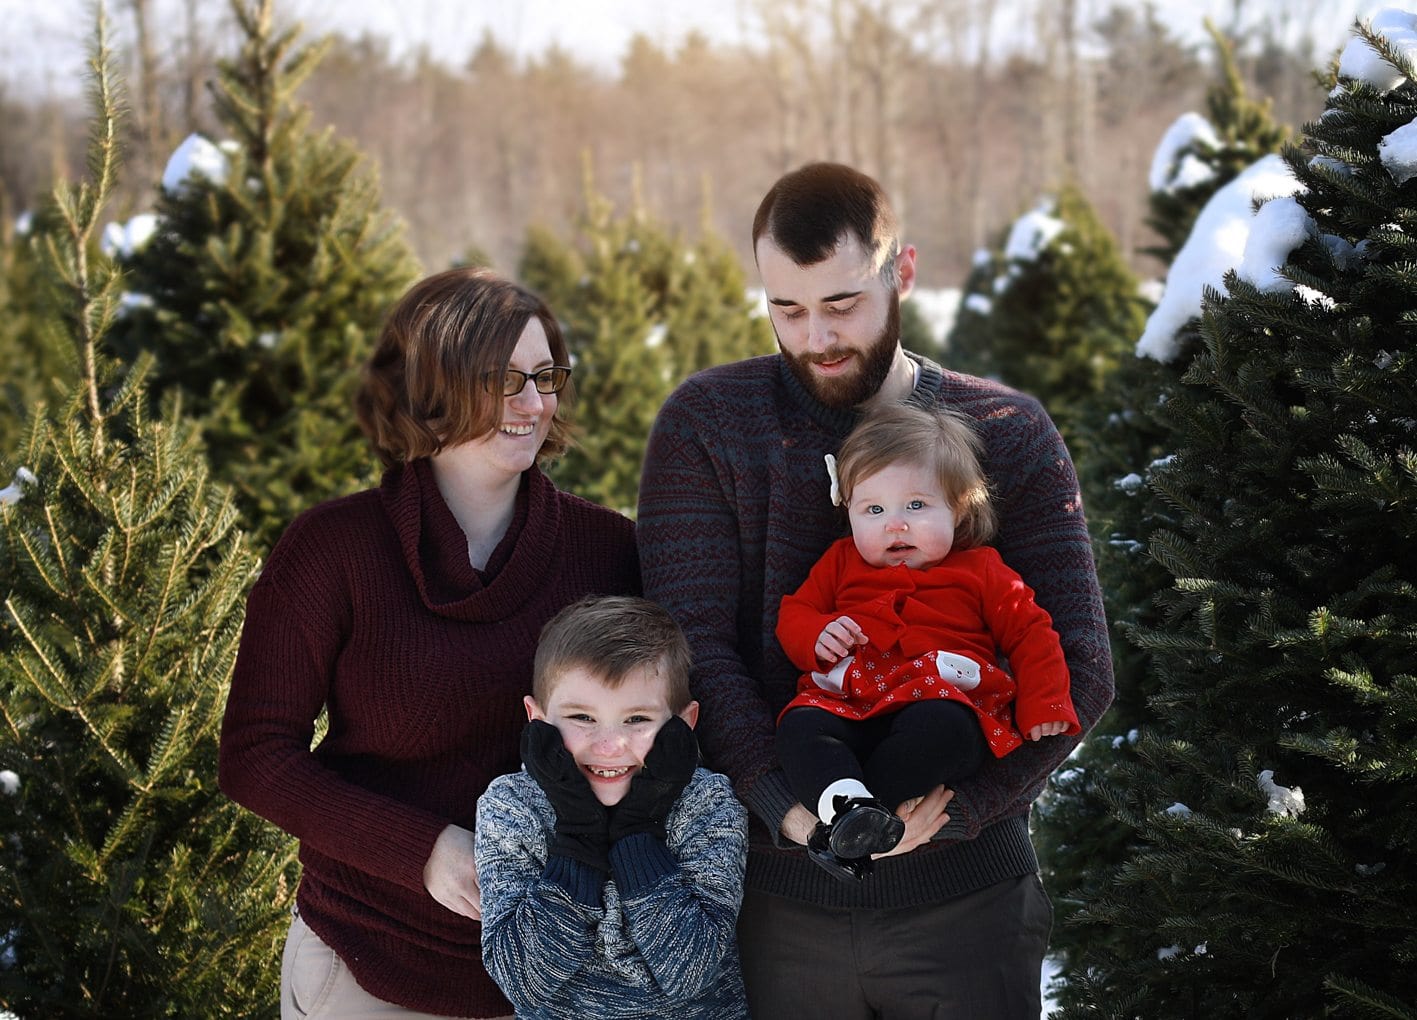 Christmas Tree Farm Photography Session in Maine